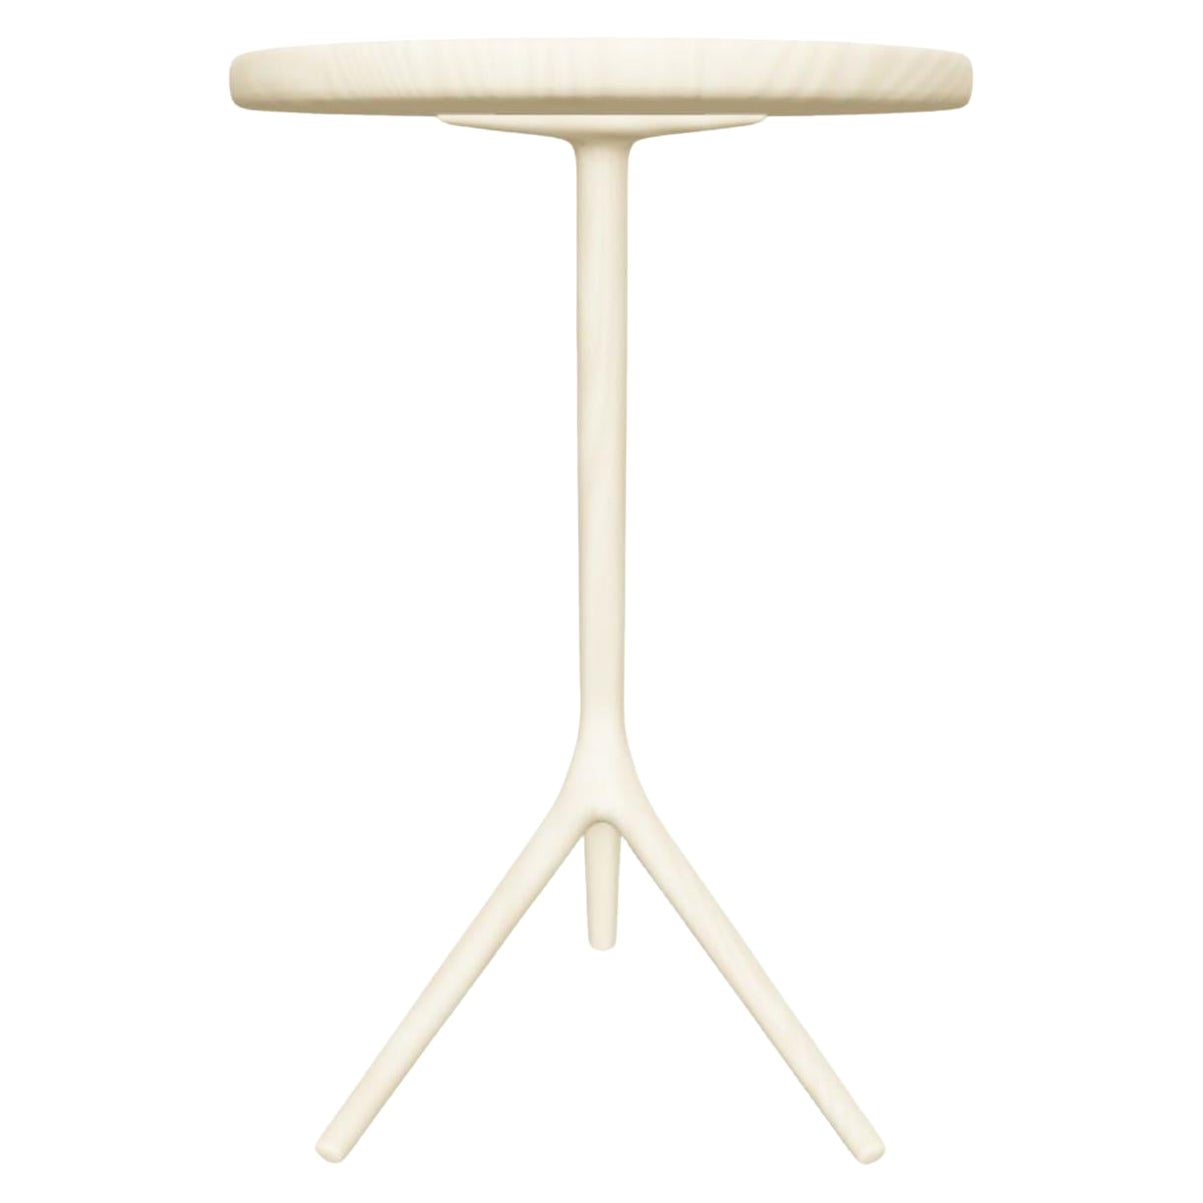 White Ash Short Tripod Table by Fernweh Woodworking